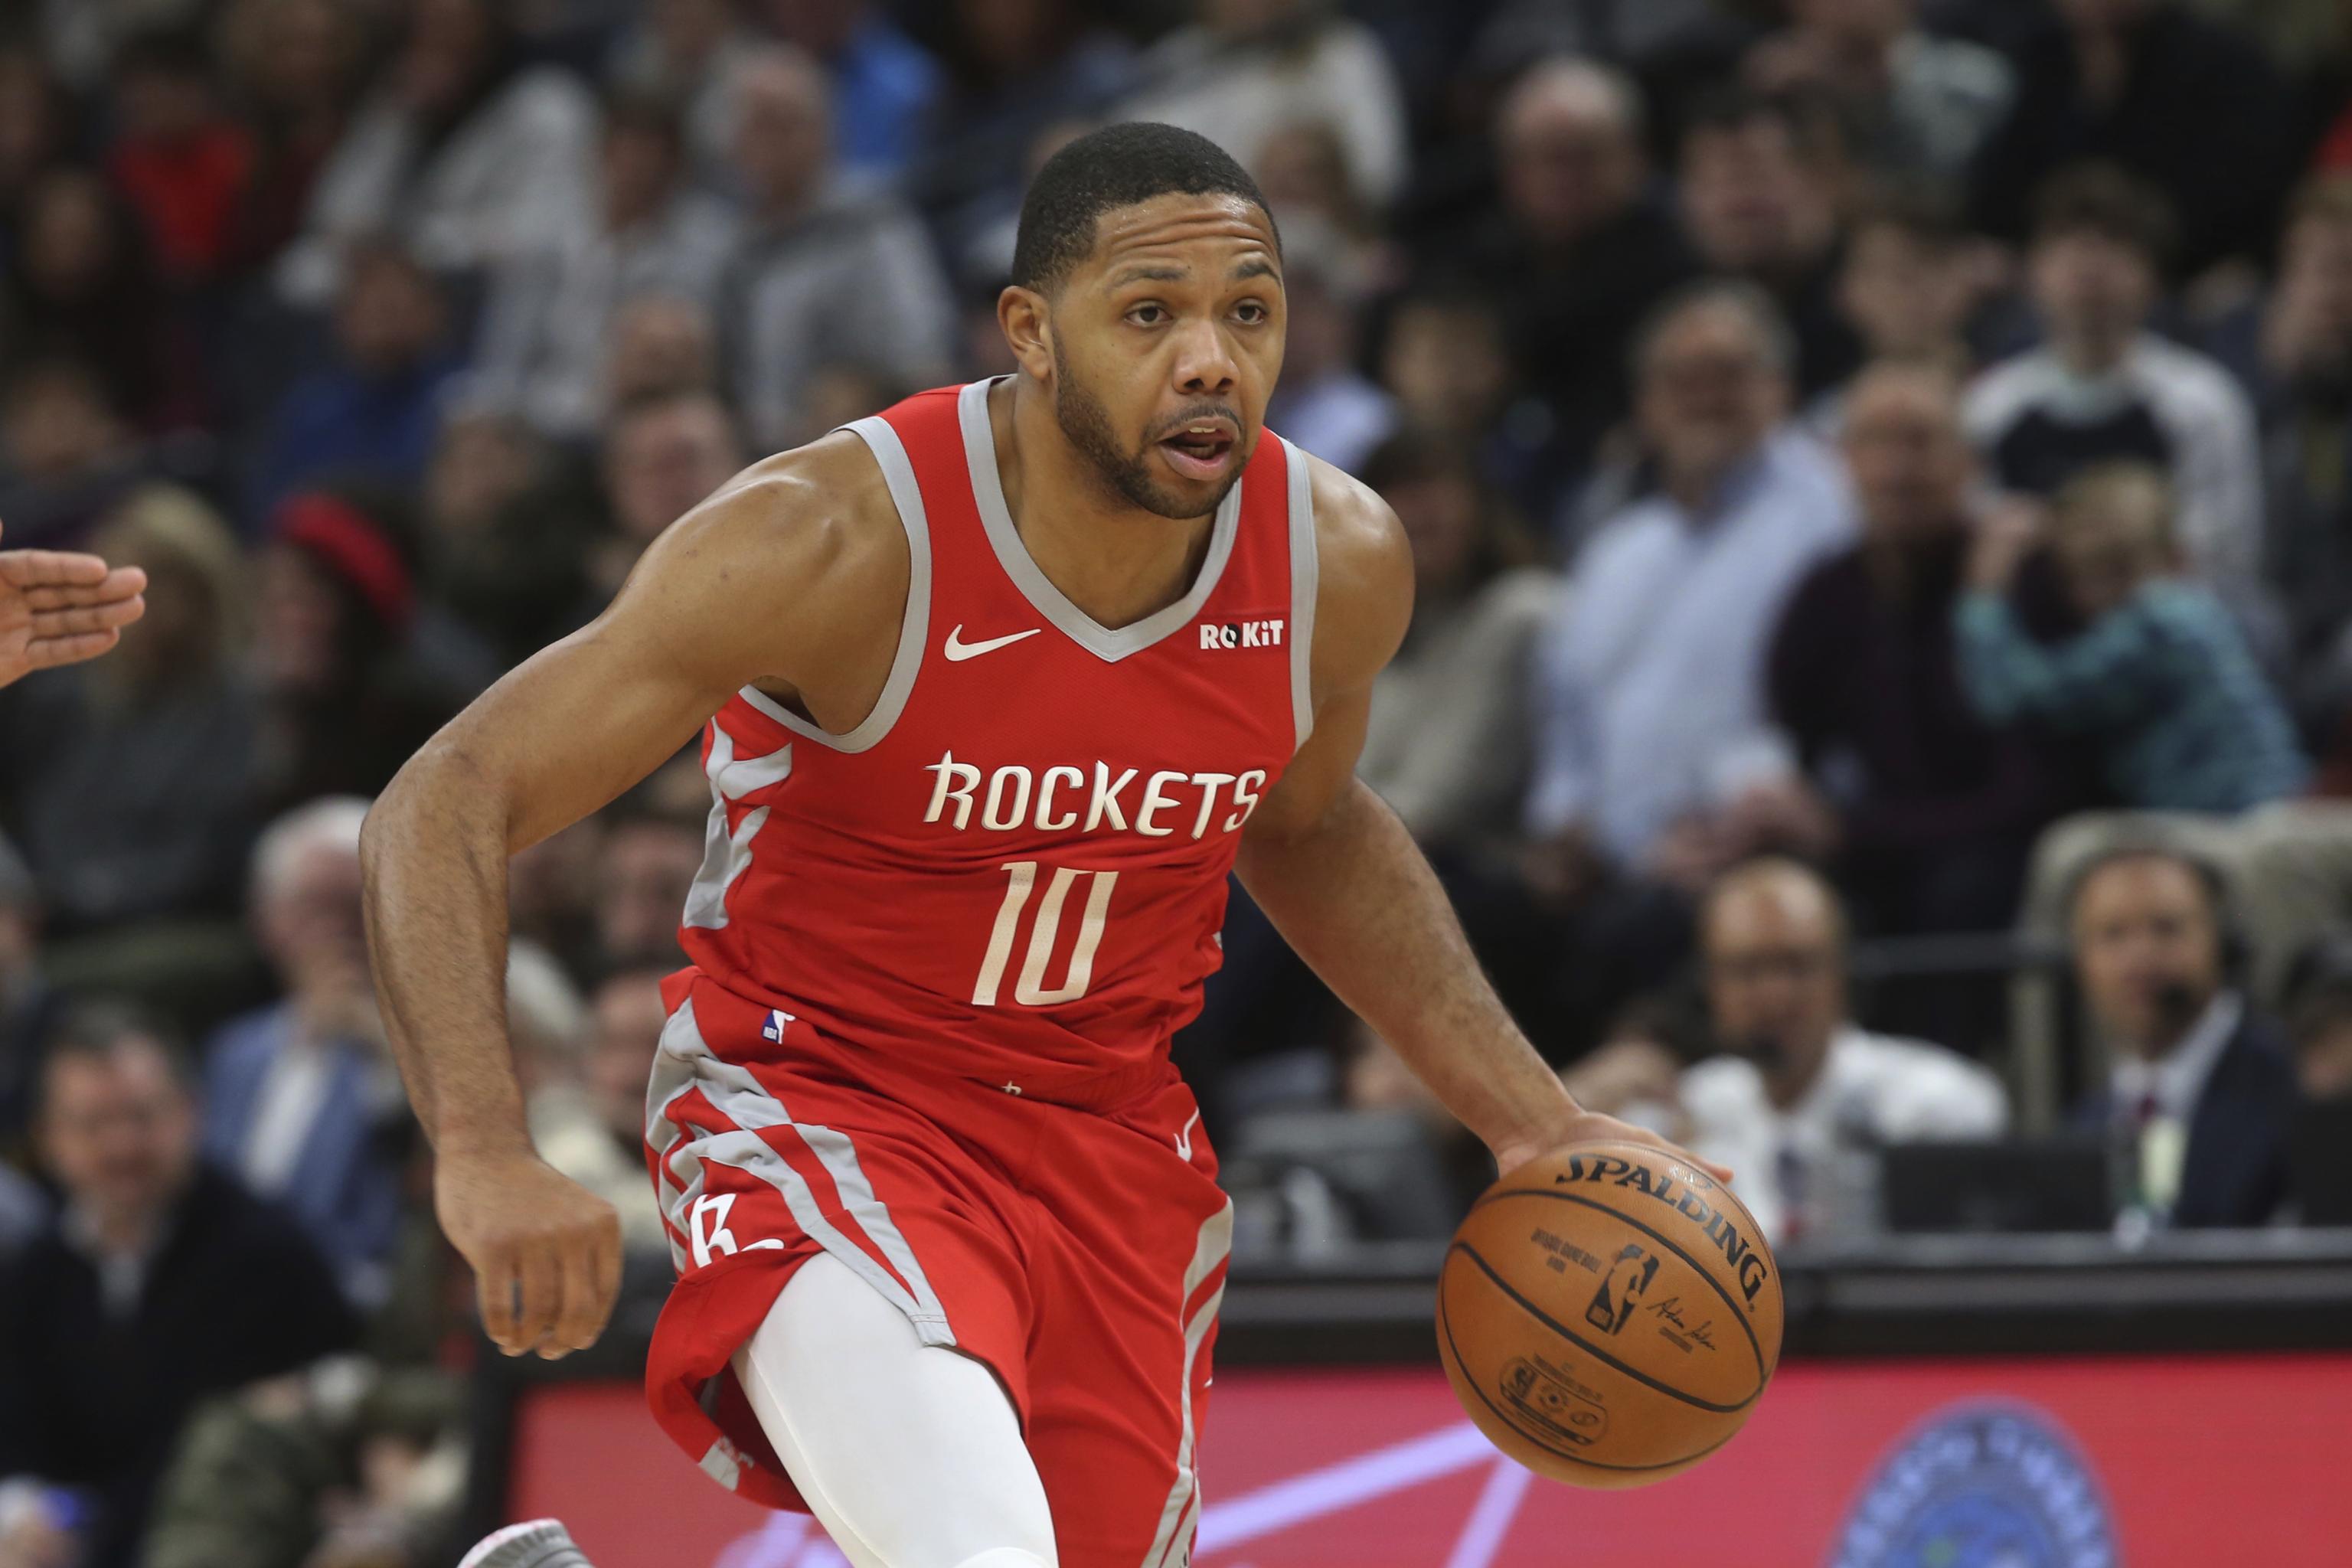 Rockets Eric Gordon To Return From Knee Injury Vs Nets After Missing 8 Games Bleacher Report Latest News Videos And Highlights